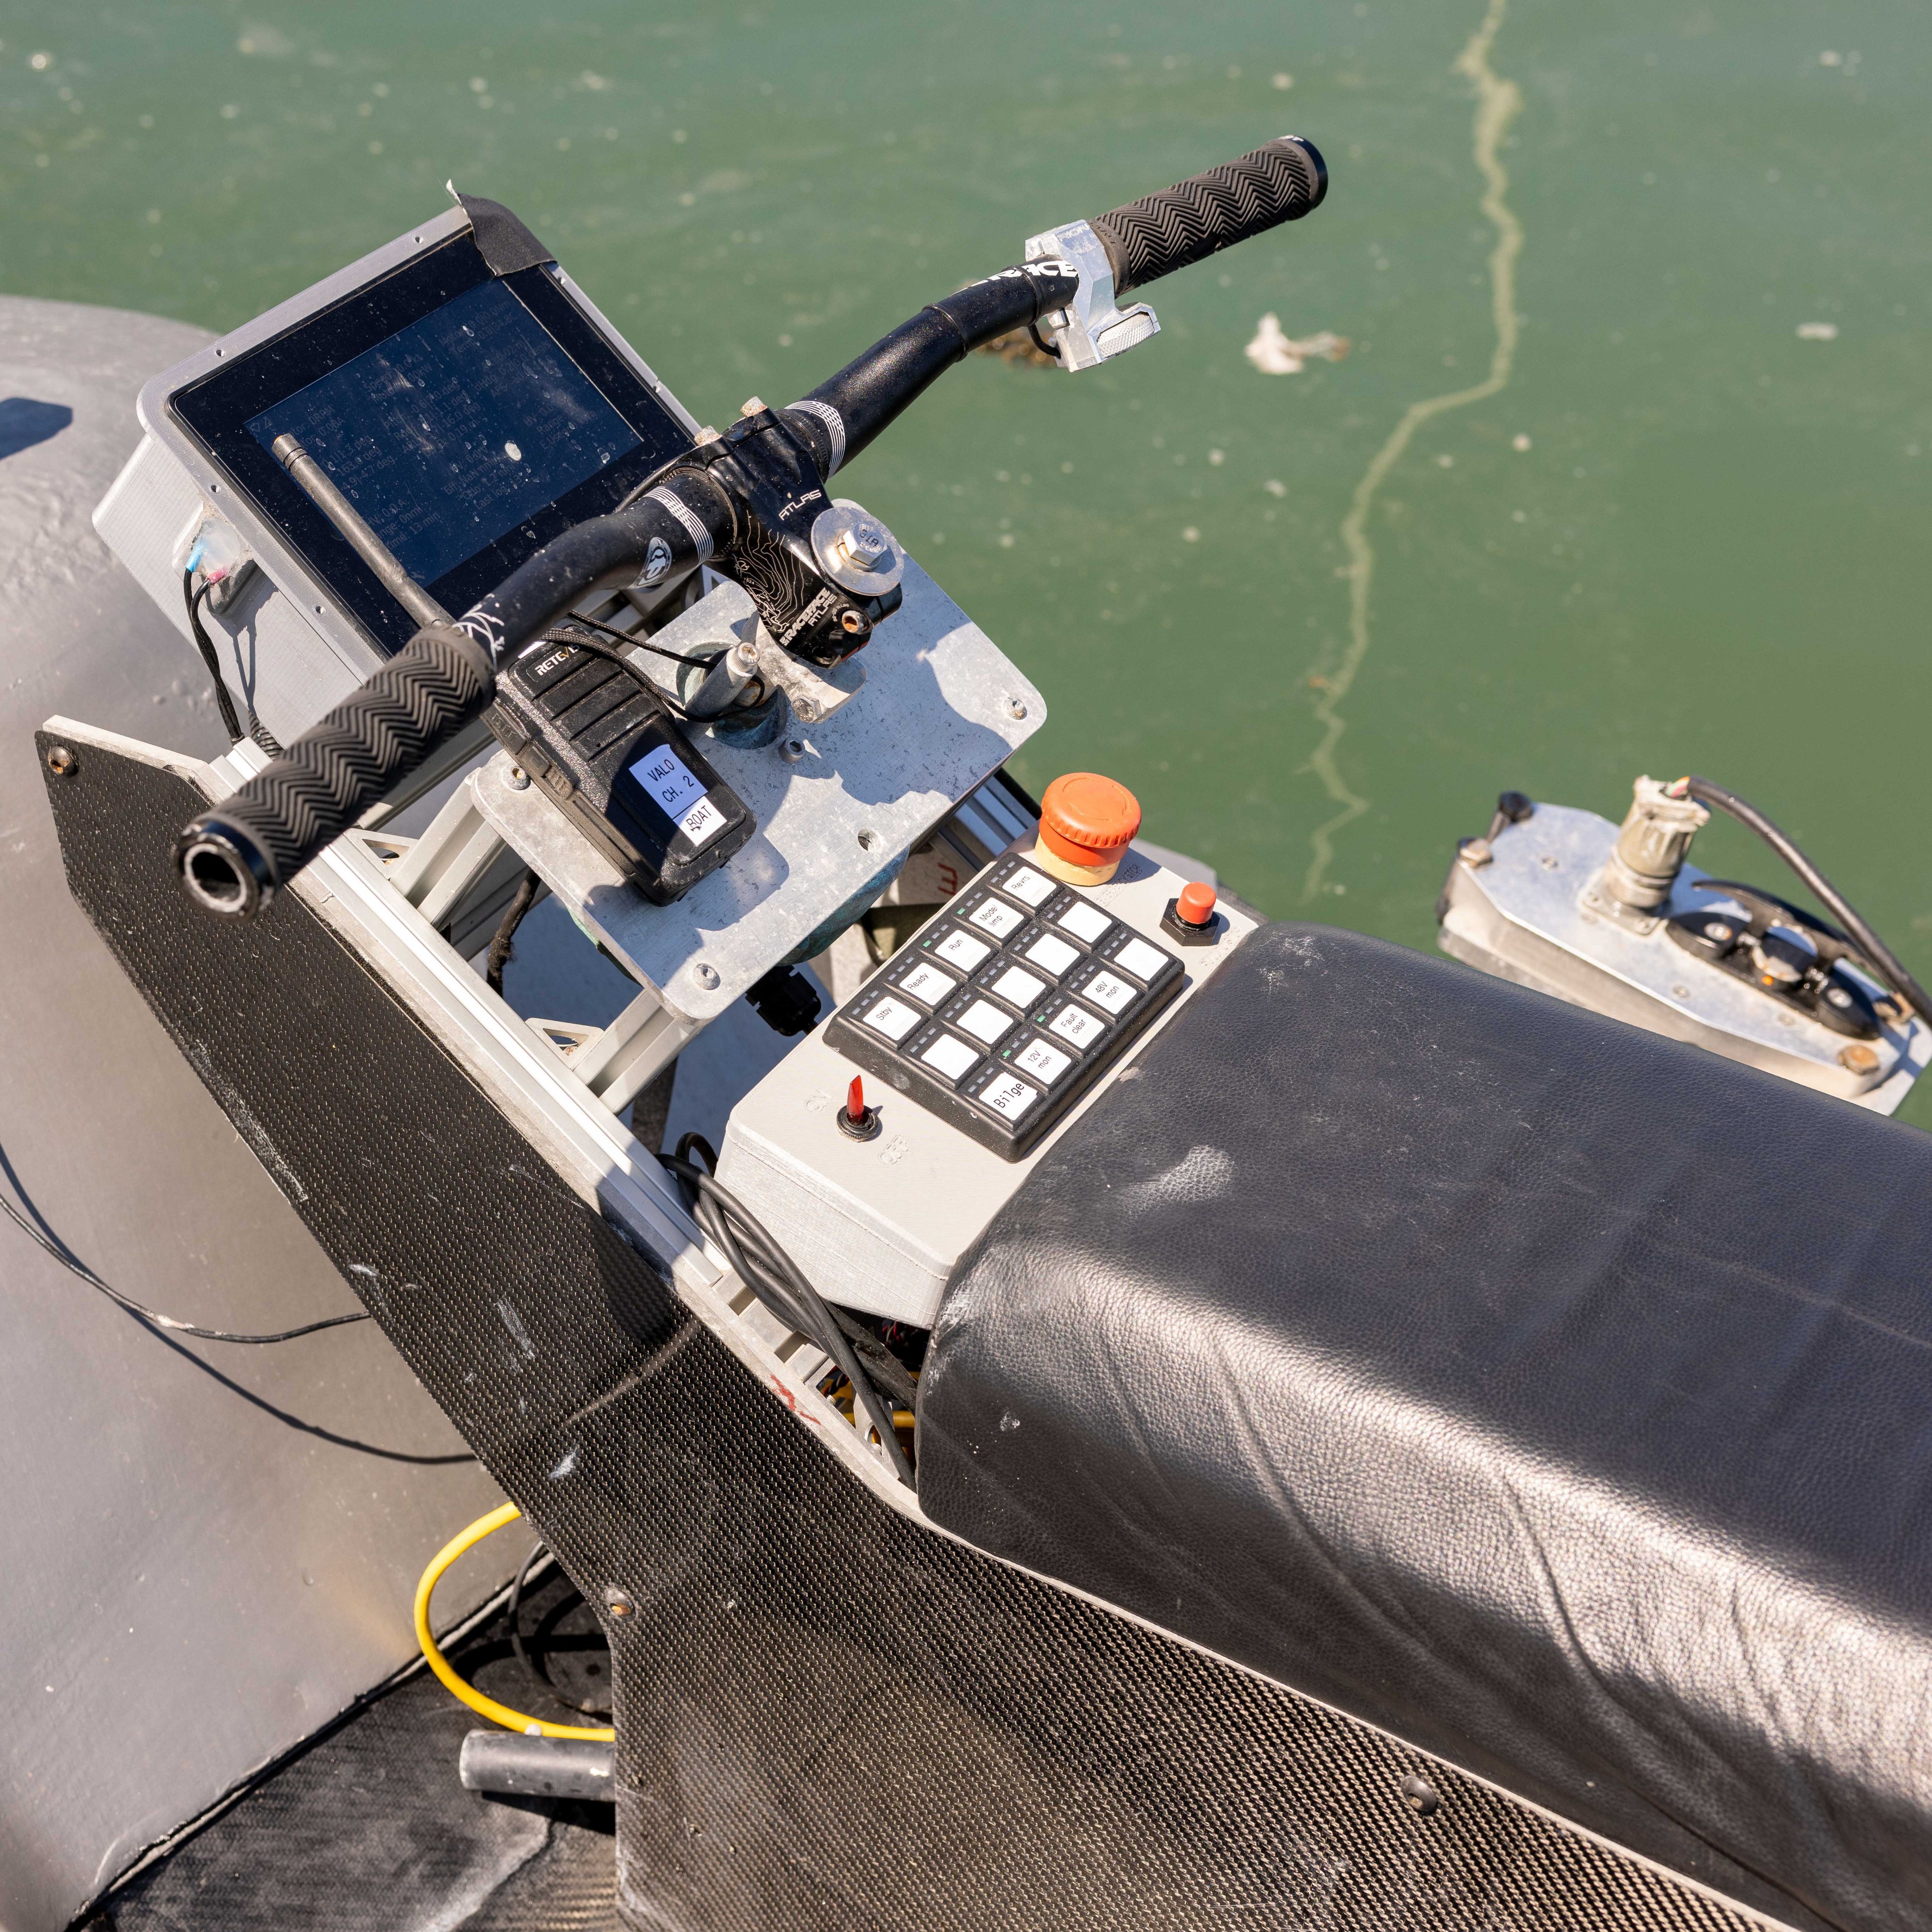 The image shows a boat's control console with a handlebar, a mounted tablet, buttons, switches, and a joystick on a sleek, cushioned seat by the water.